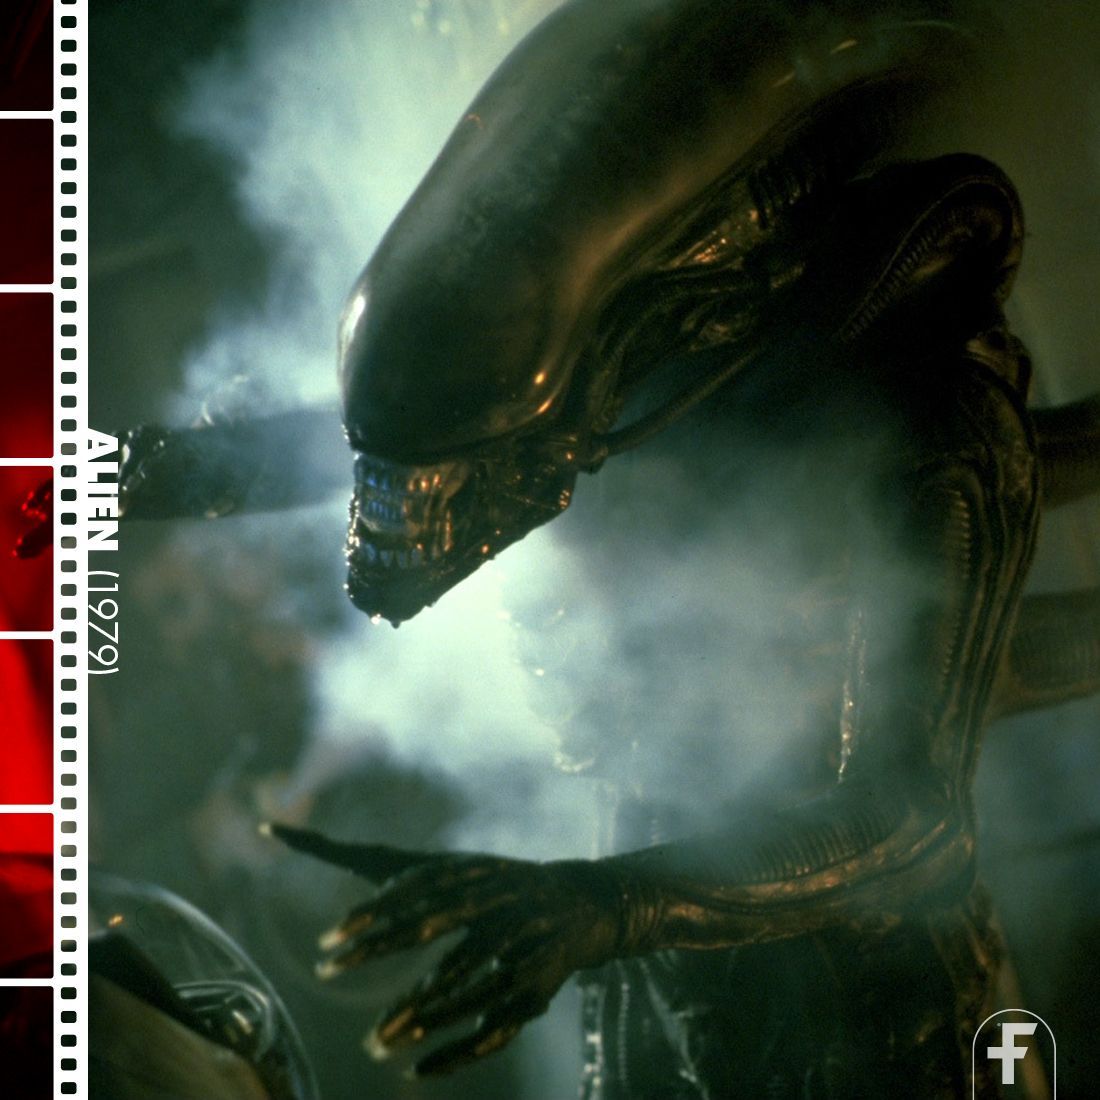 In space no one can hear you scream. On this day in 1979: Ridley Scott's ALIEN was released.